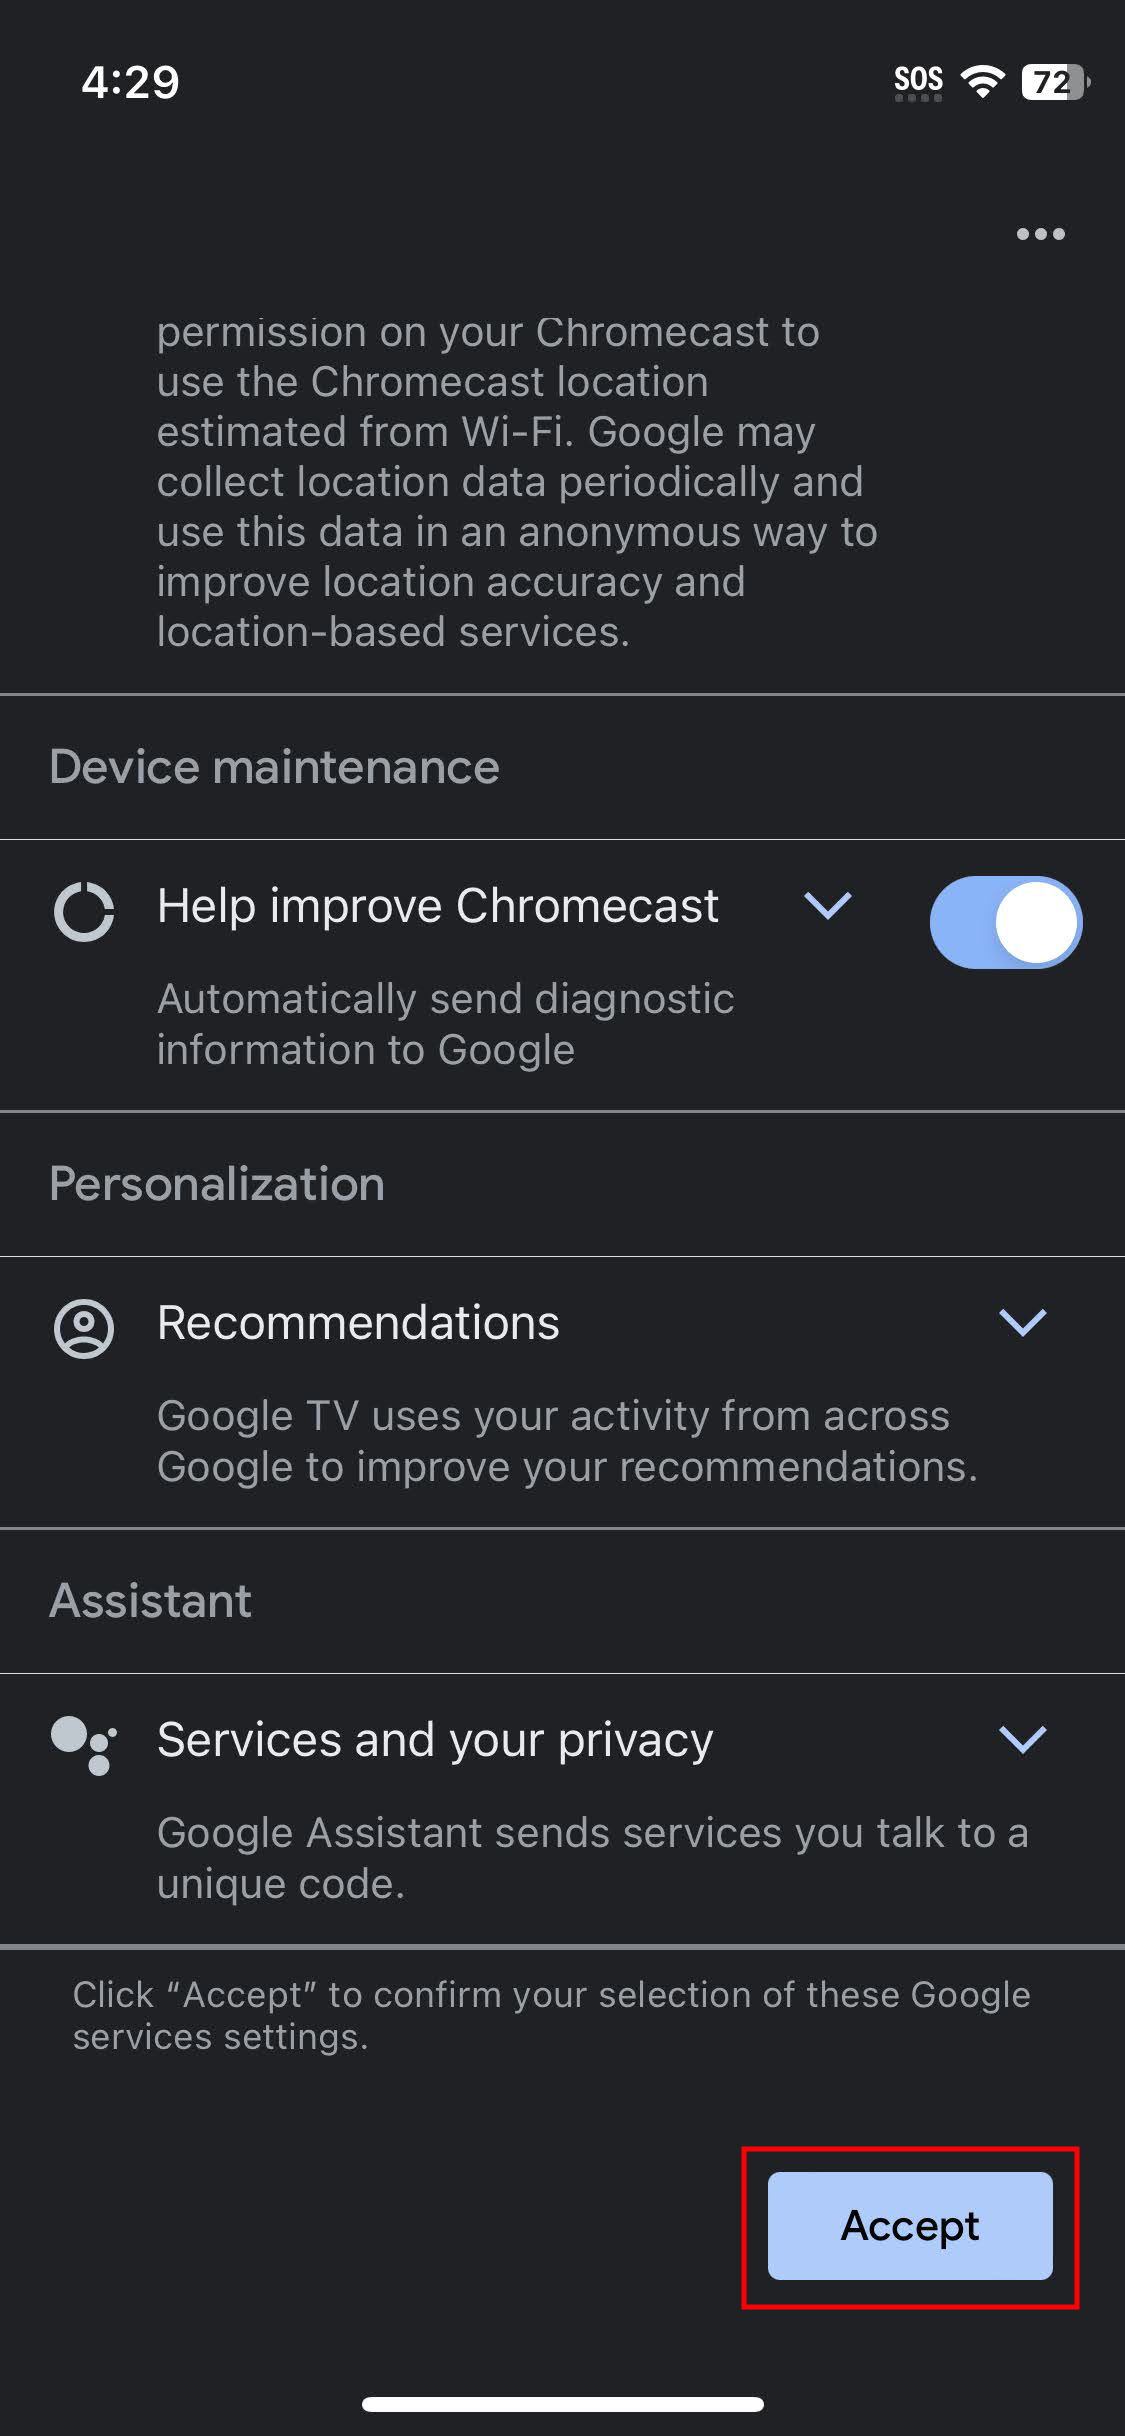 How to set up Chromecast with Google TV using an iPhone (13)